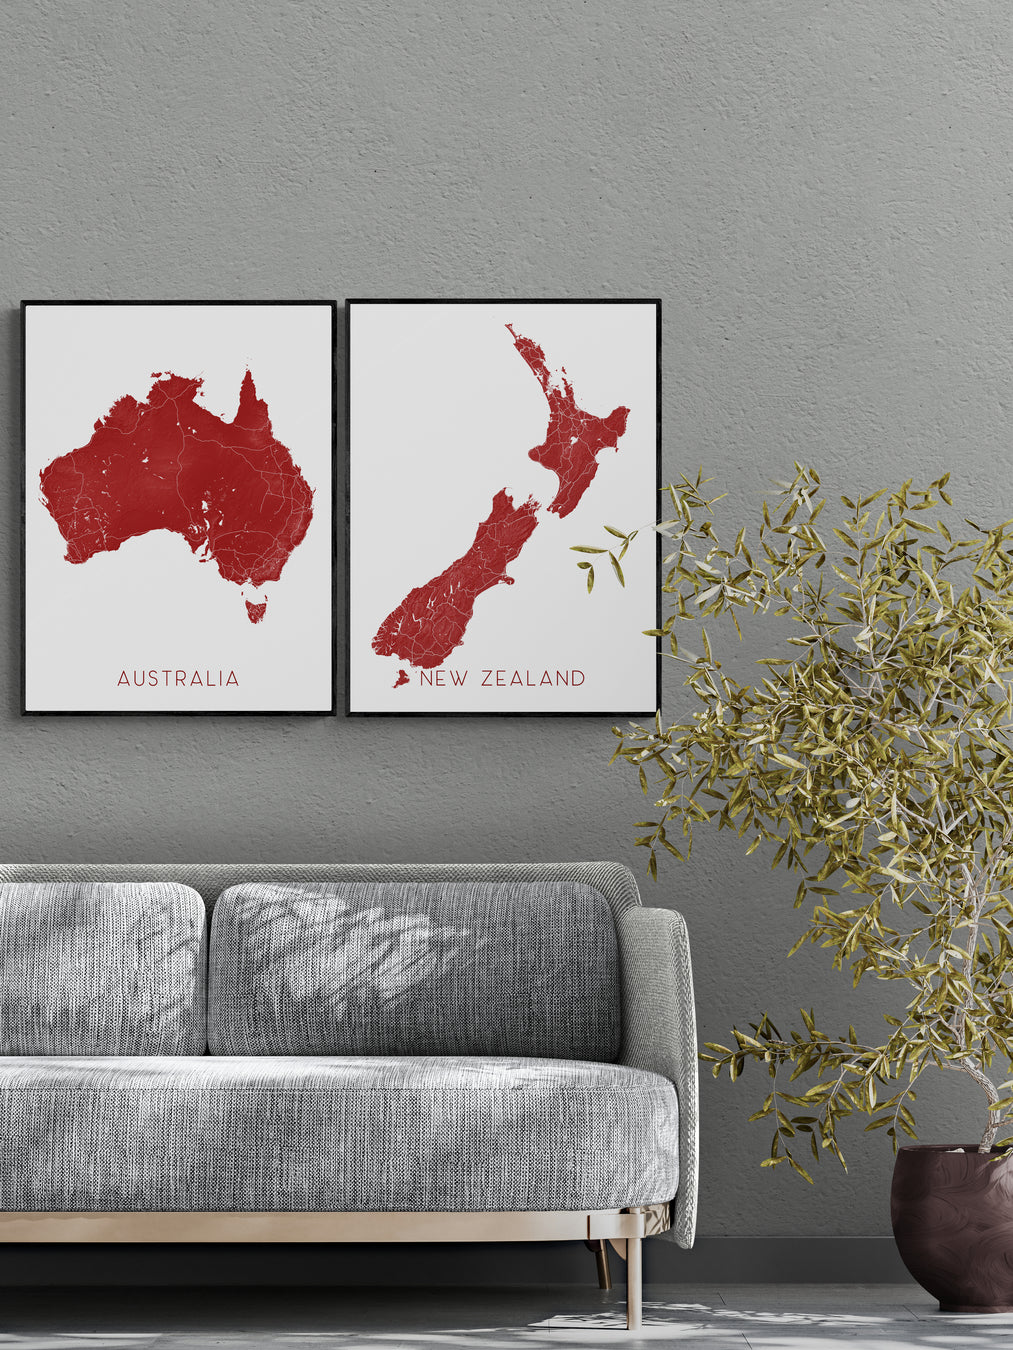 A oceania collection of map art prints by Maps As Art.